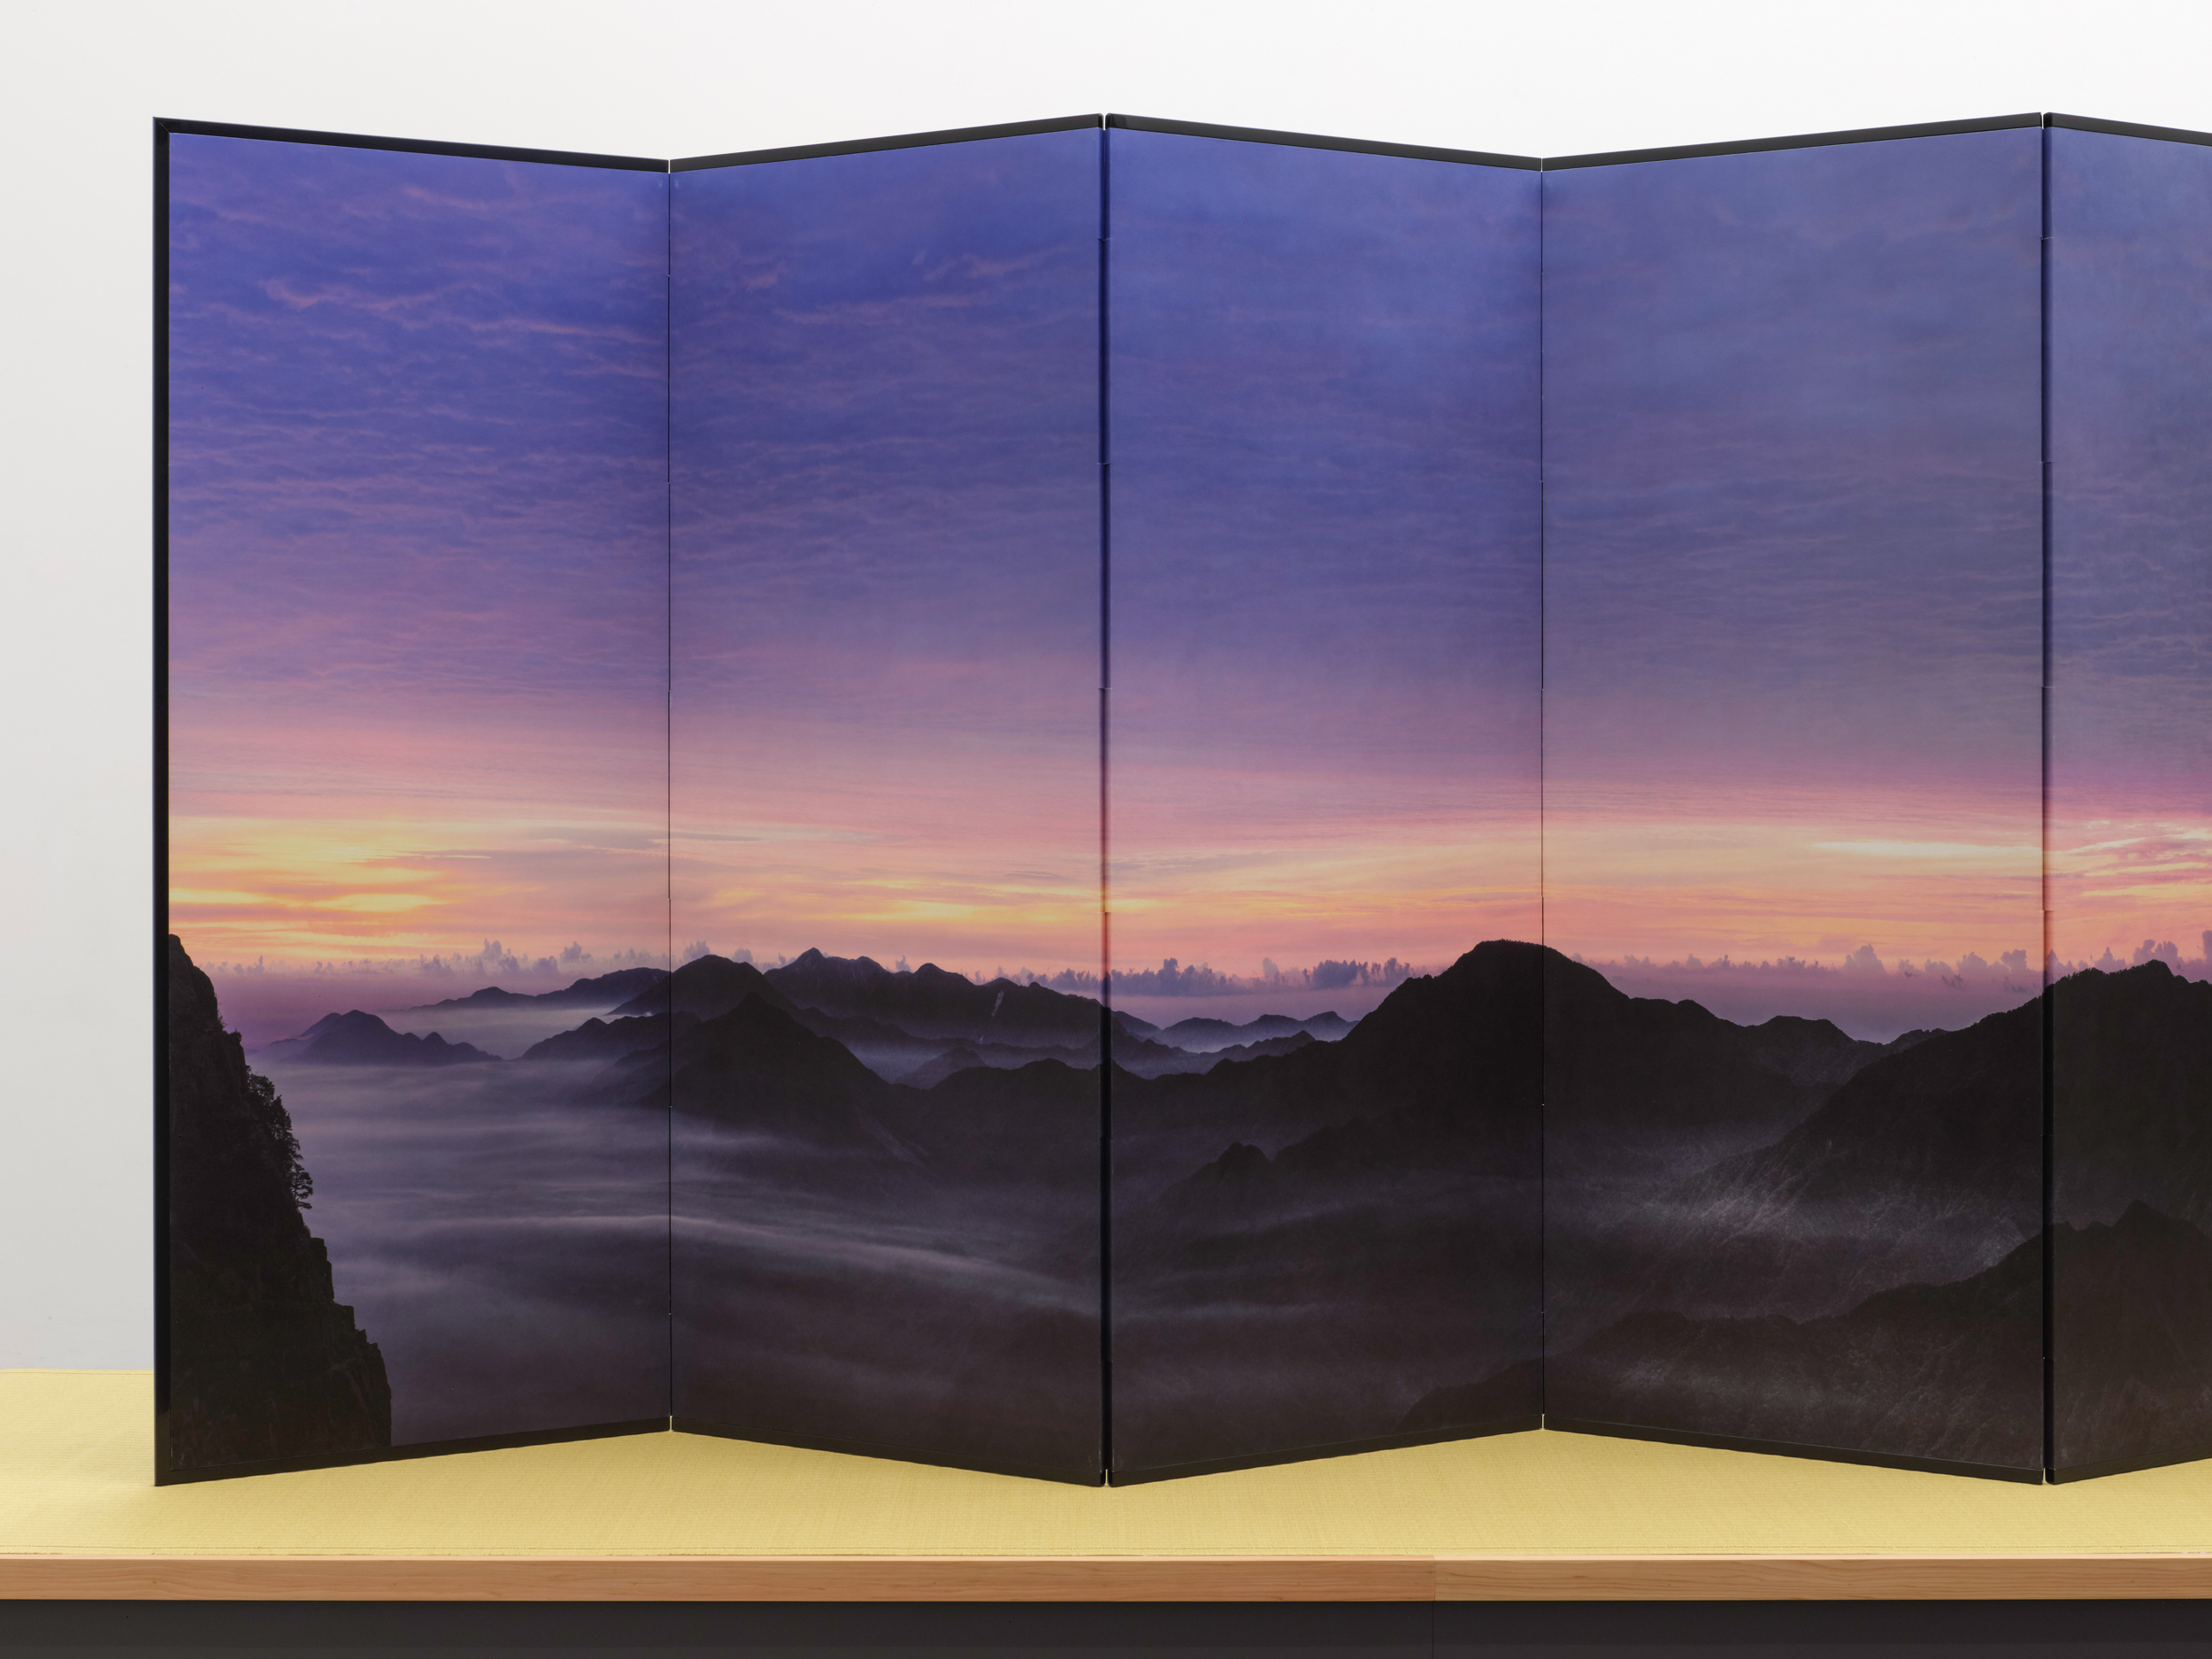 An instillation shot of a folding screen depicting a landscape at sunset on the screen